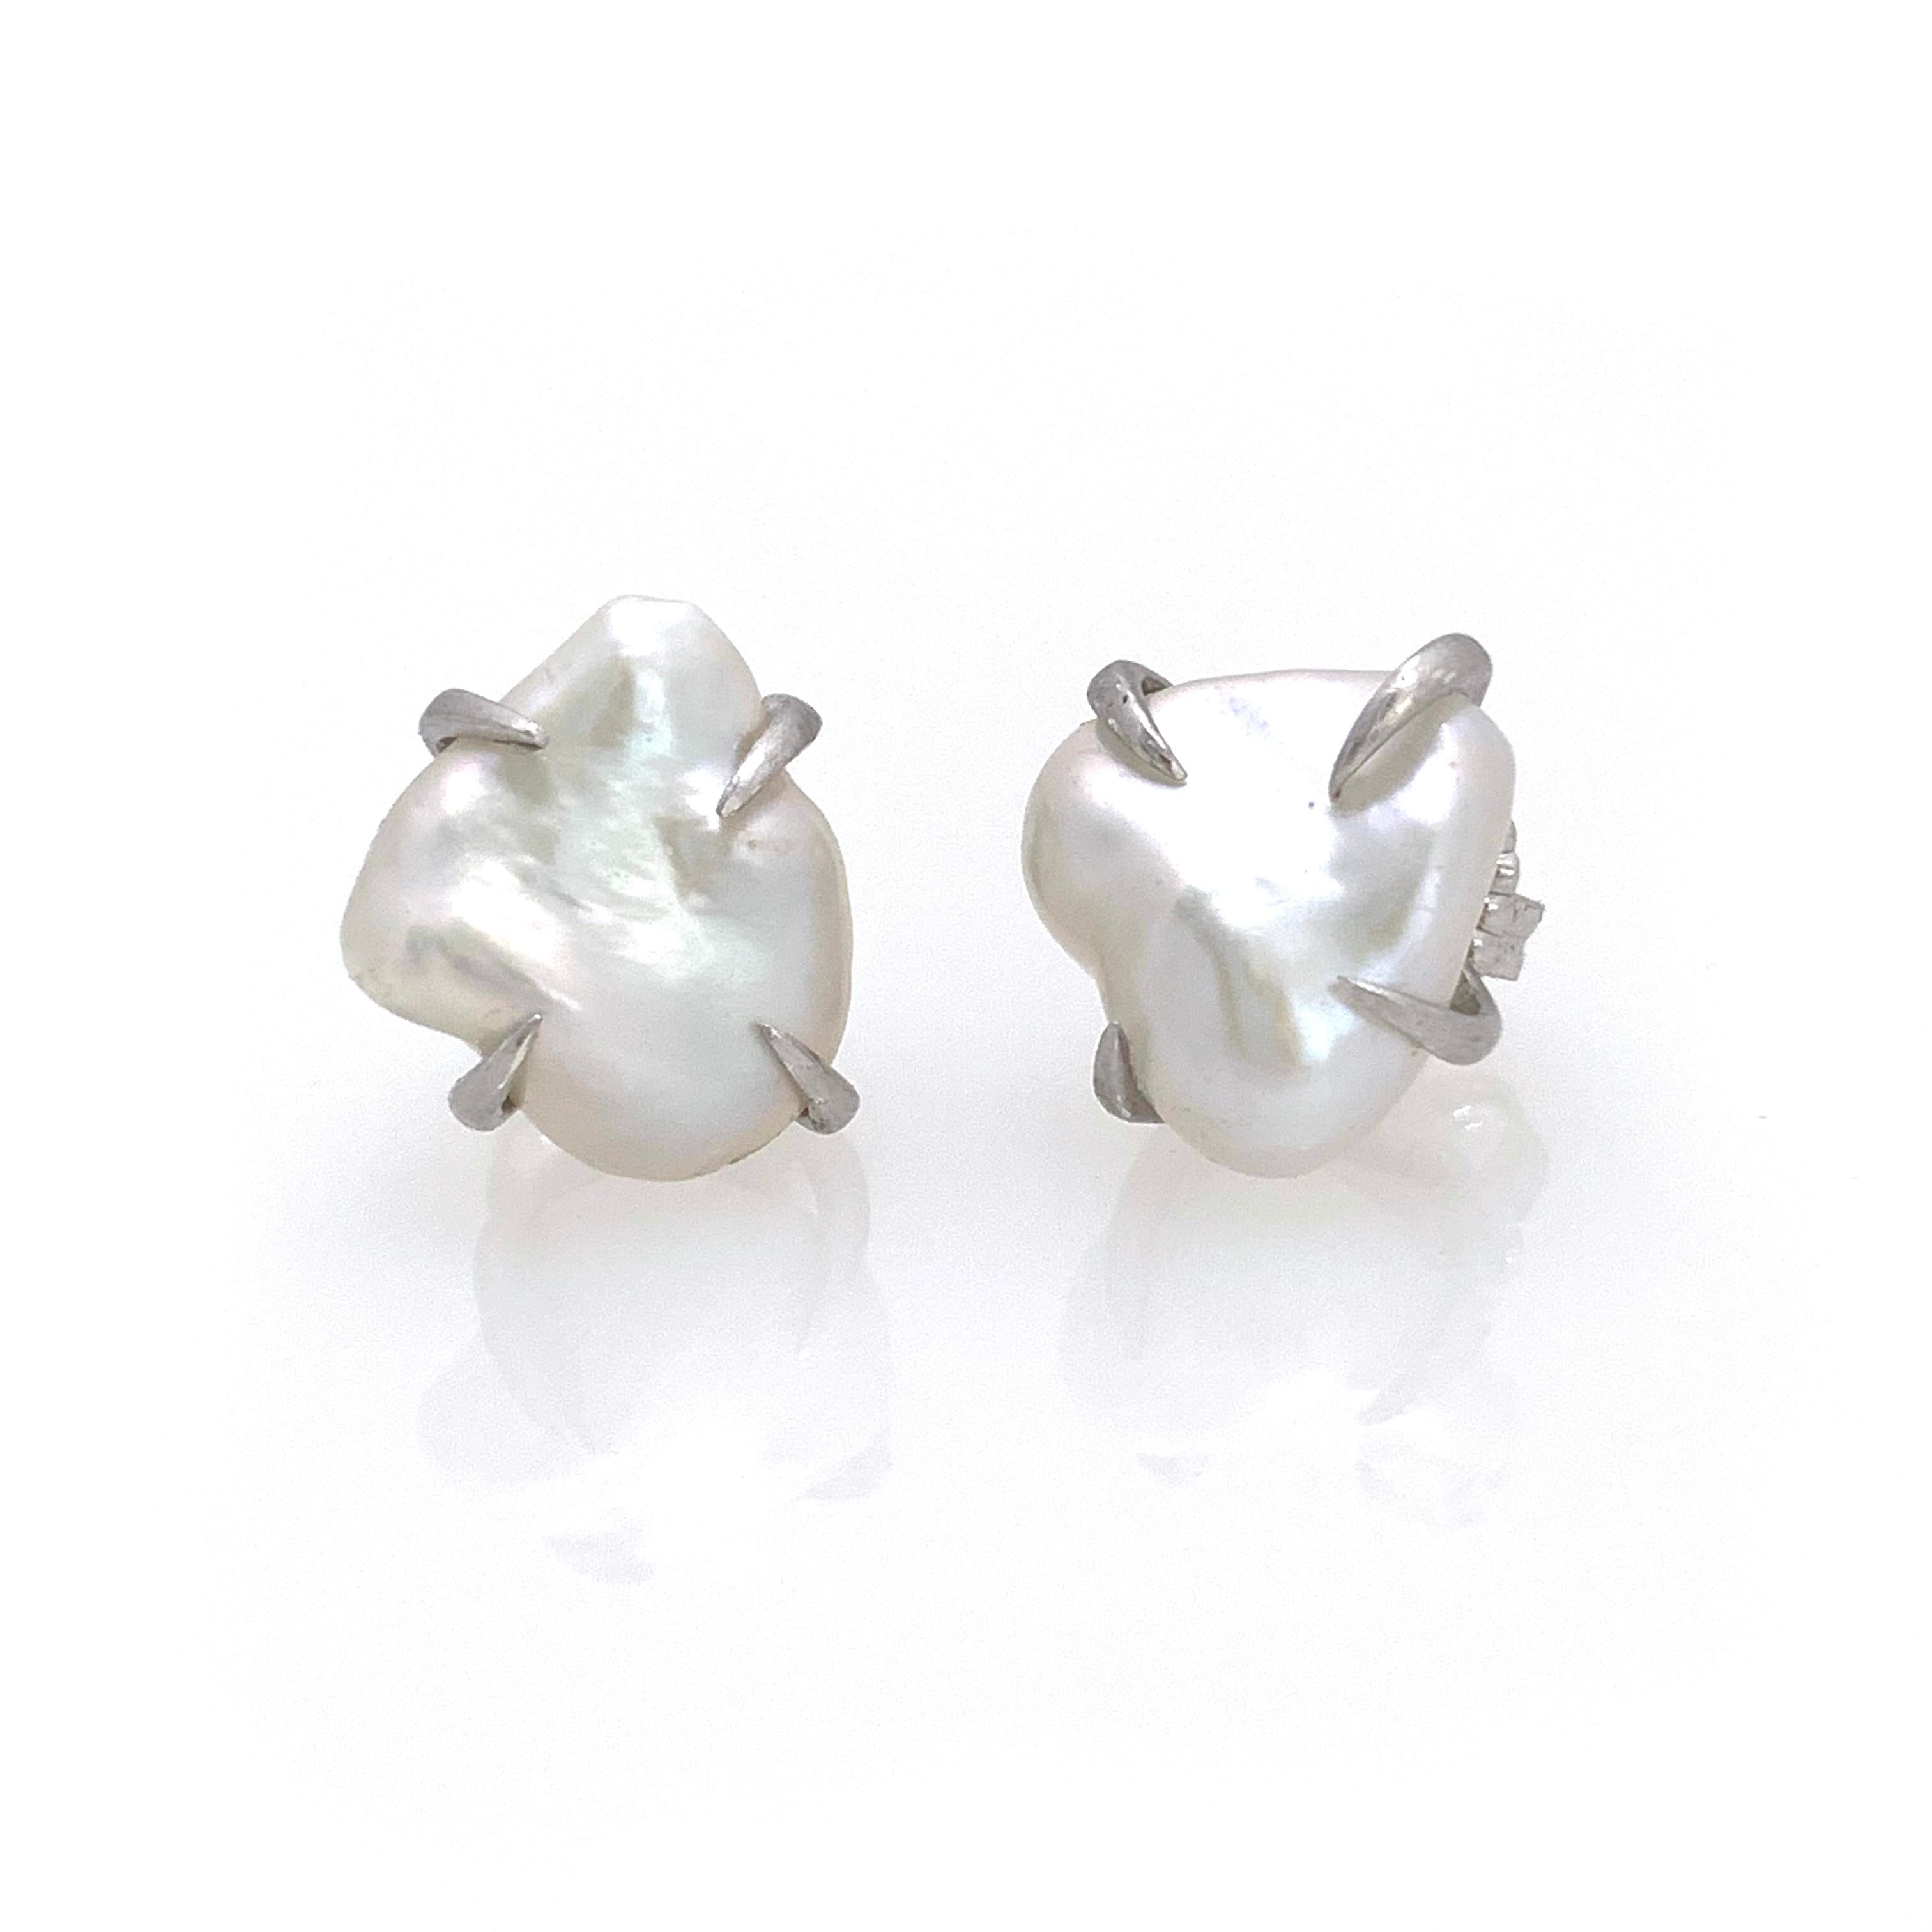 Beautiful pair of lustrous white baroque pearl stud earrings. The pair measures 12-13mm width, handset in platinum rhodium plated sterling silver (matte finish). Straight post with large friction back allowing the earrings to sit well on the ear.